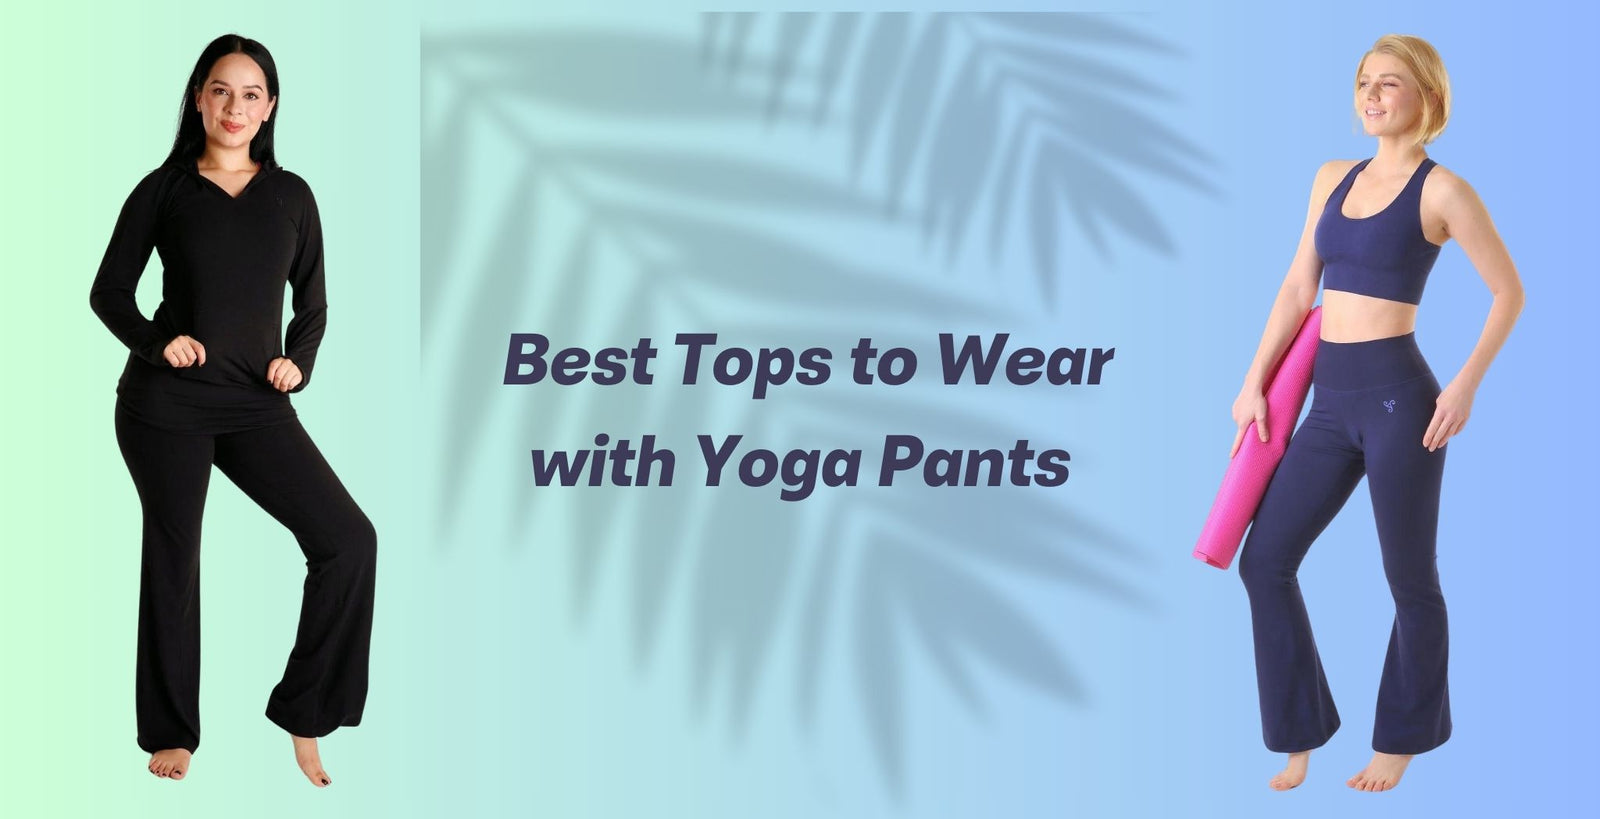 Stylish Pairings: Best Tops to Wear with Yoga Pants - Green Apple